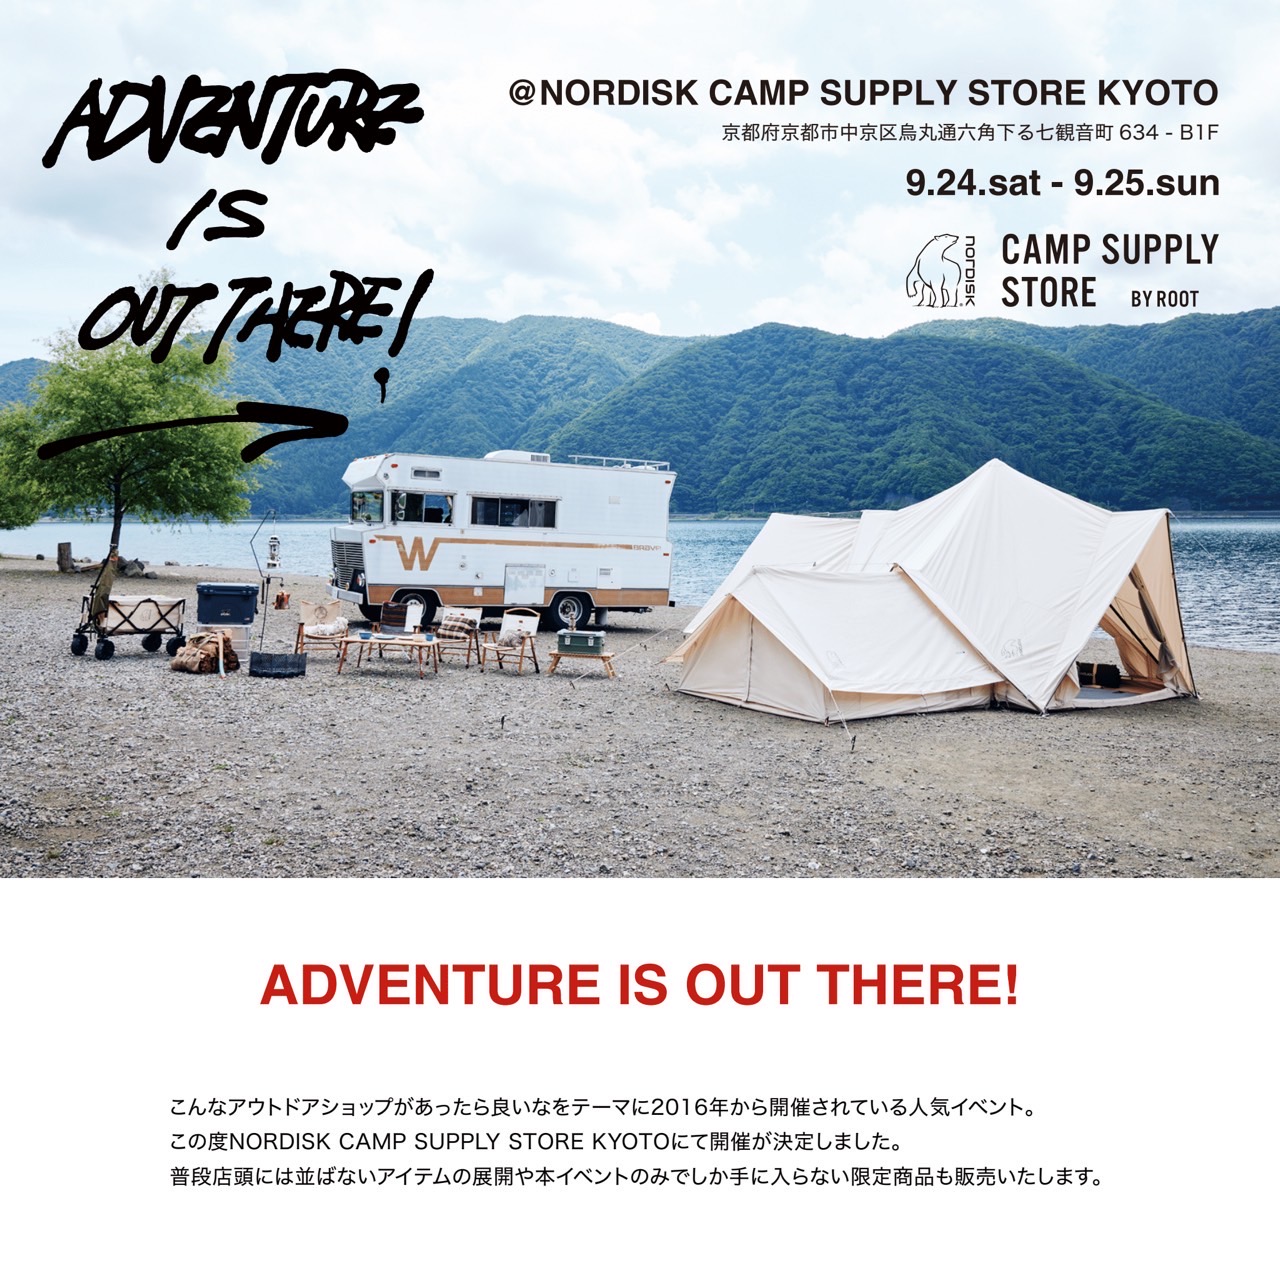 【NORDISK CAMP SUPPLY STORE KYOTOイベント開催】ADVENTURE IS OUT THERE! @NORDISK KYOTO